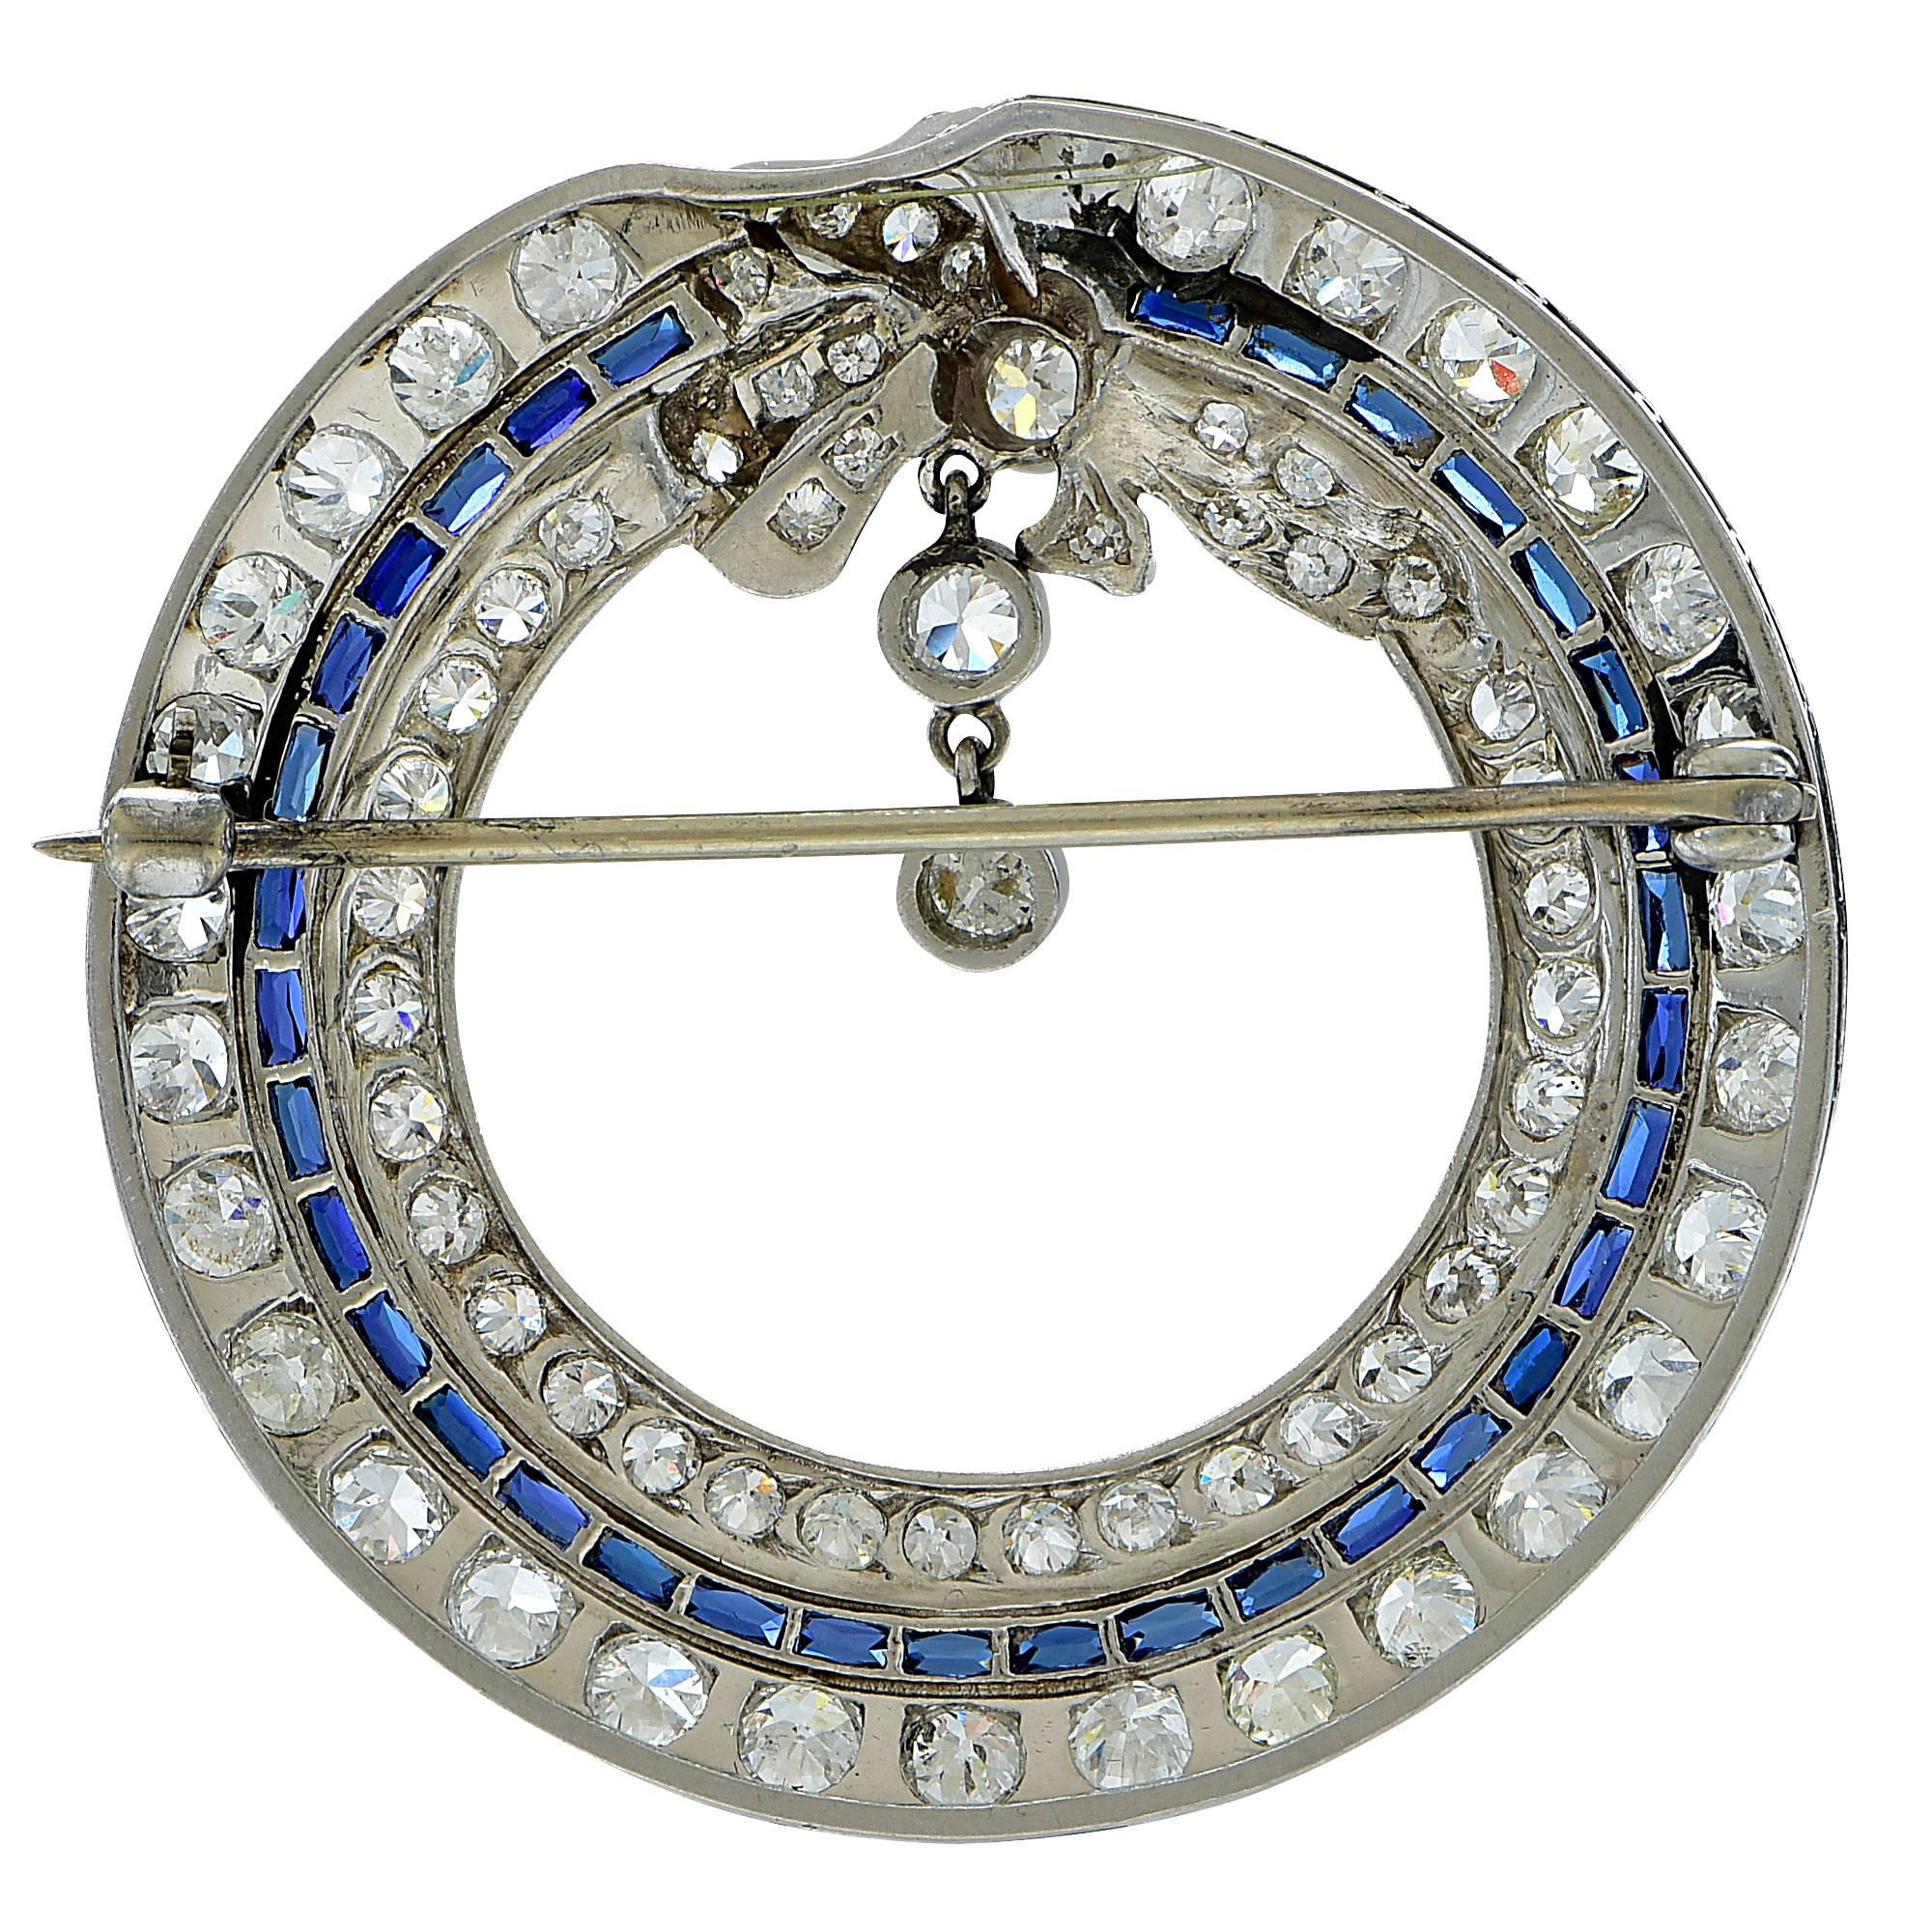 This artistically crafted platinum Art Deco brooch features 78 European cut diamonds weighing approximately 4.25cts  F-G color, VS clarity and is accented by 34 scissor cut synthetic sapphires, typical of the Art Deco period.

The brooch measures